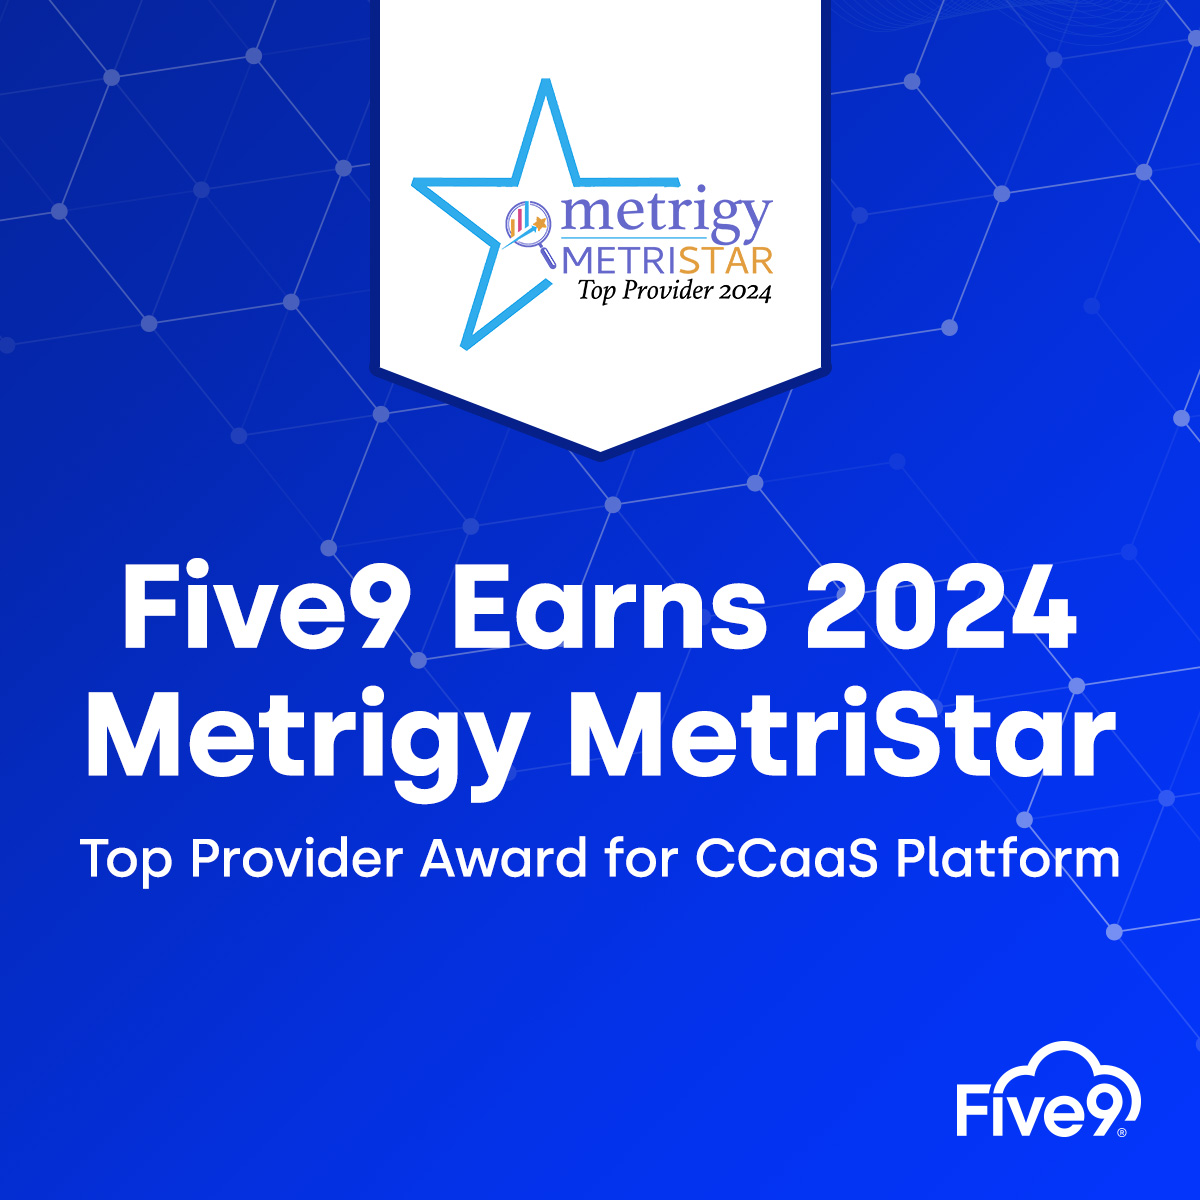 We are honored to receive the @Metrigy MetriStar Award for the 3rd time! ⭐ Learn more about how Five9 continues to innovate and strengthen partnerships to deliver best-in-class solutions. #MetriStar #CX #CCaaS spr.ly/6015eV3El